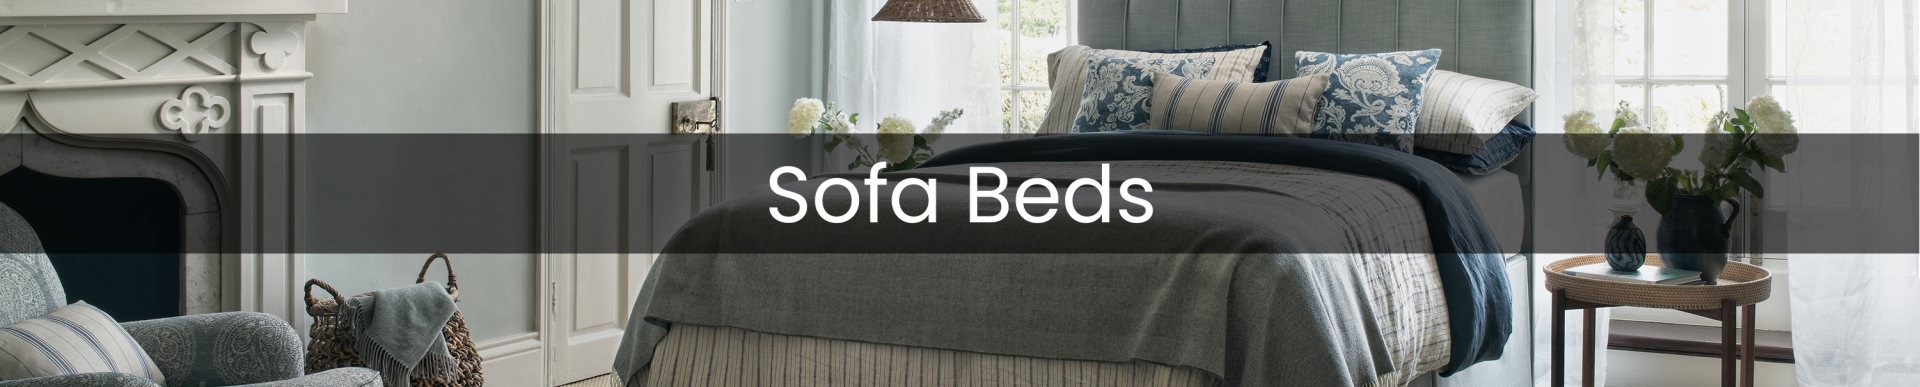 sofabeds